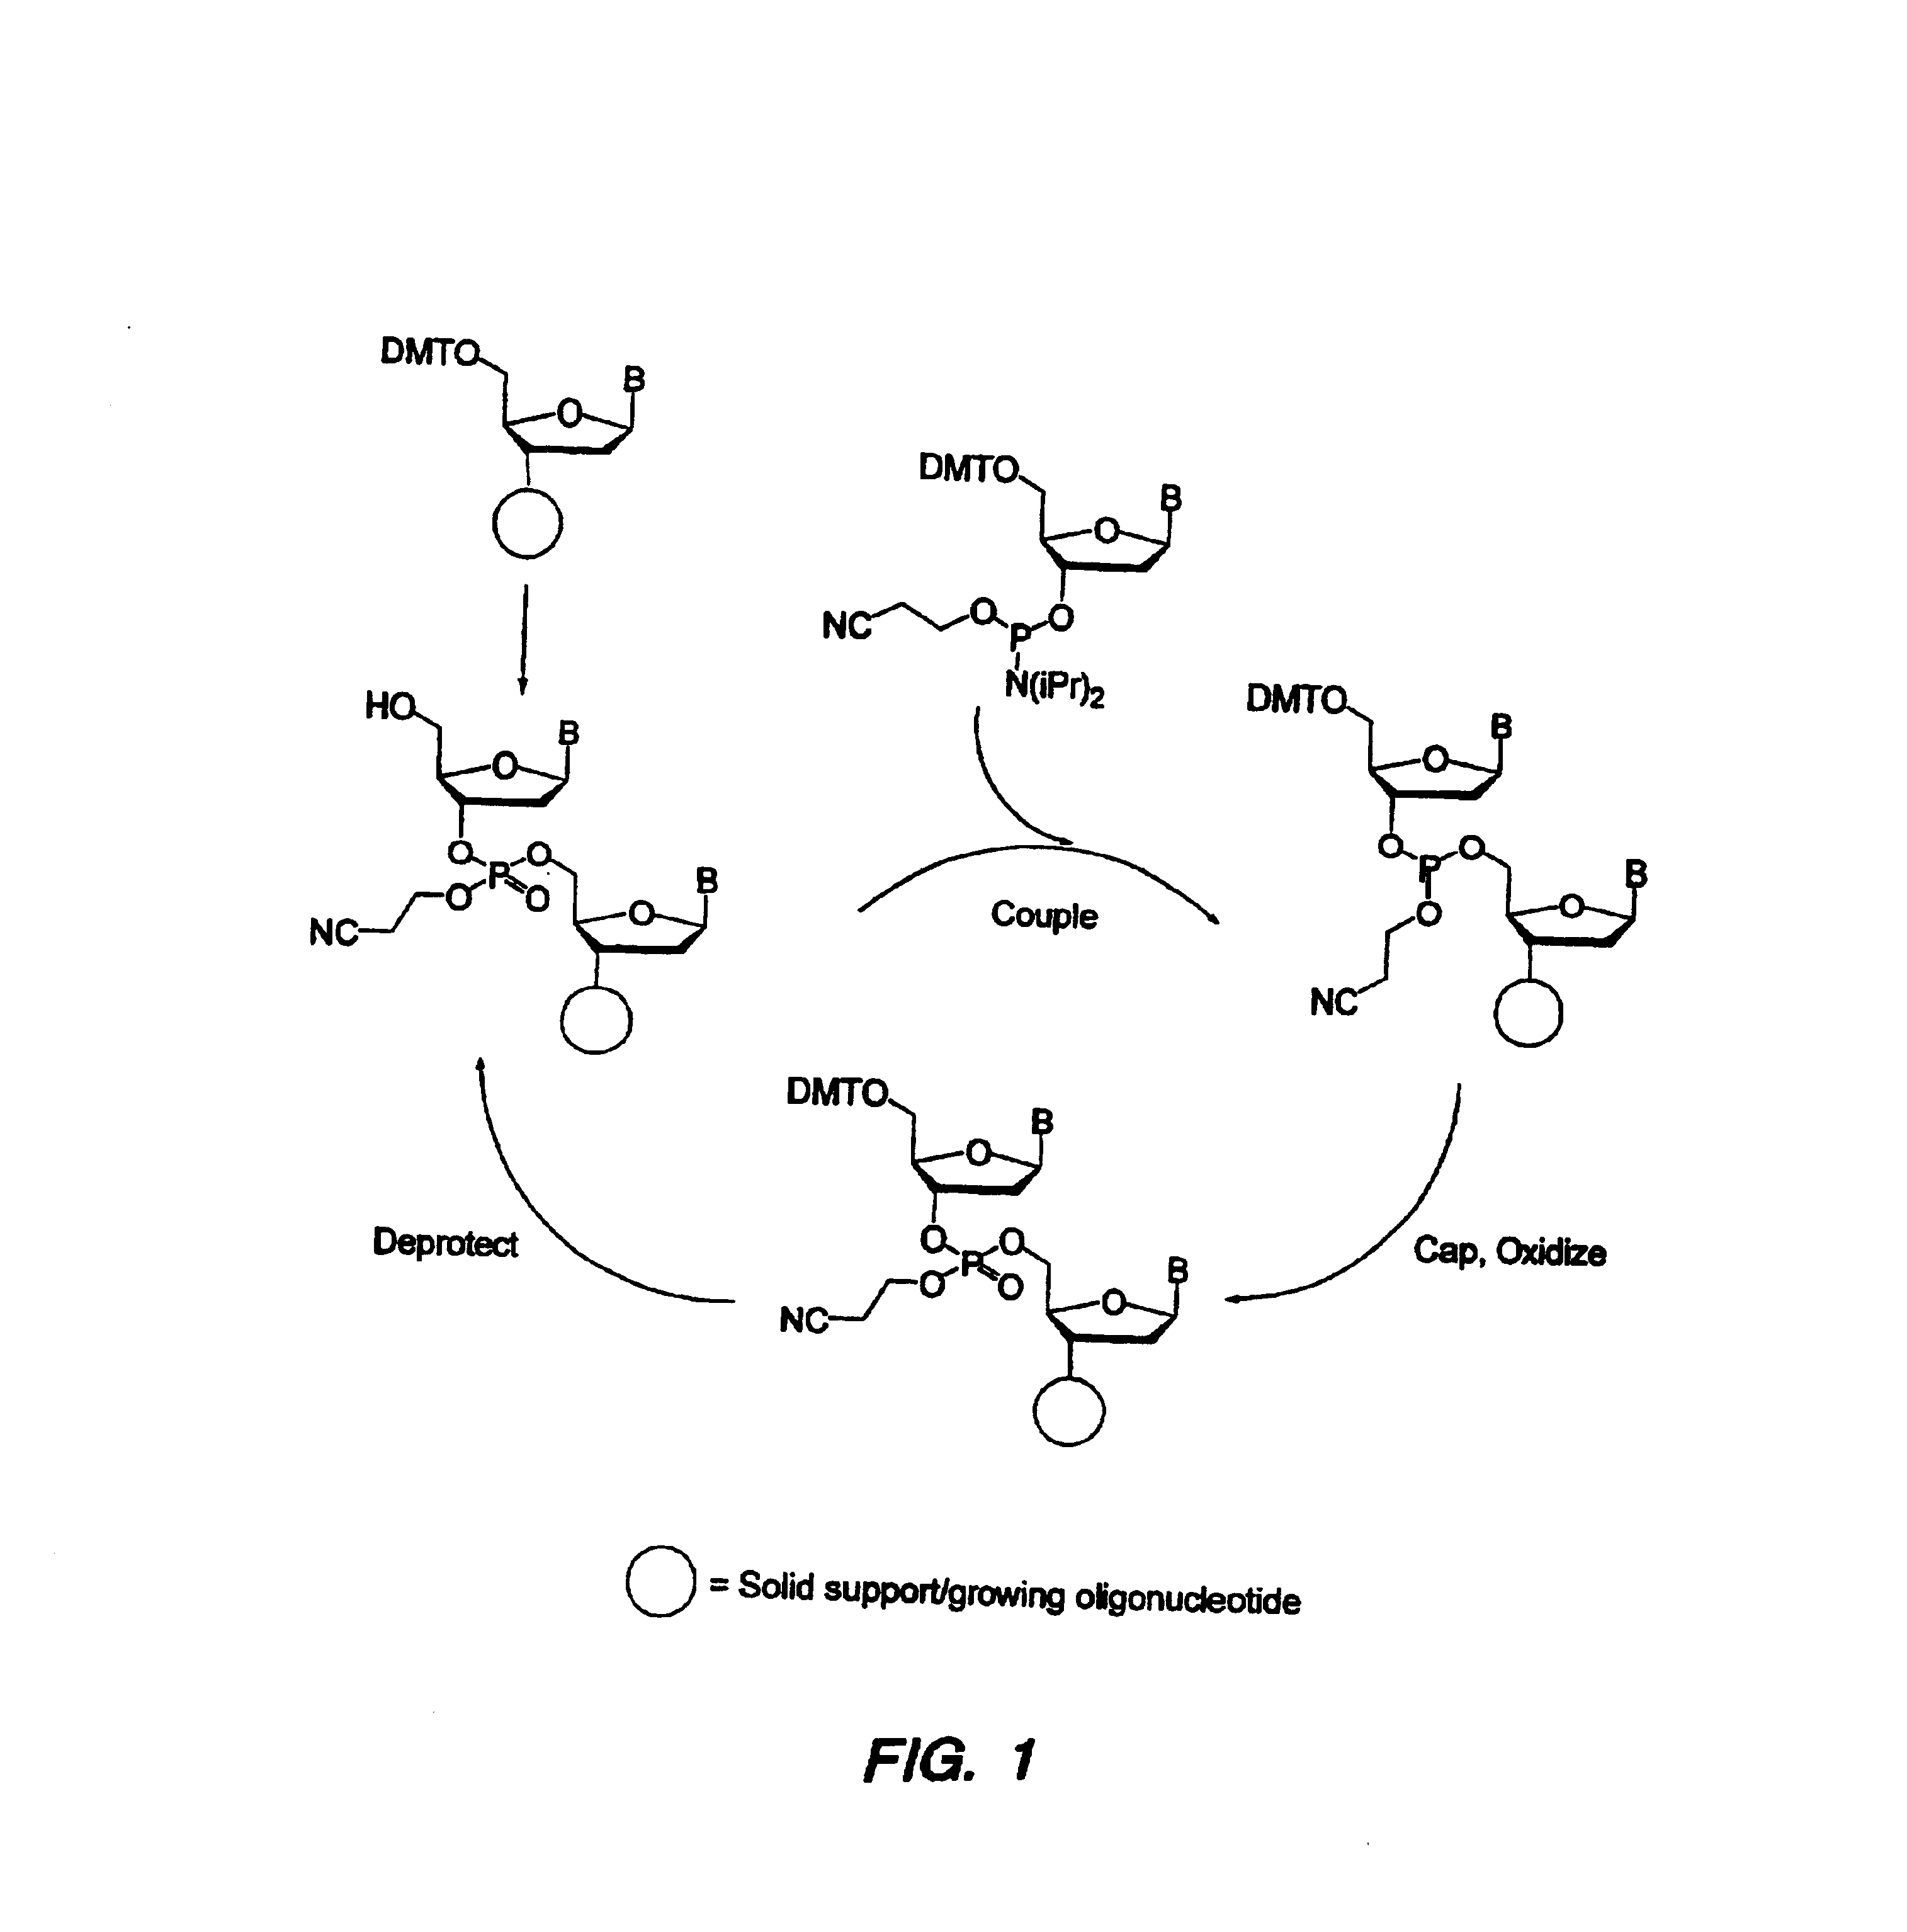 Use of ionic liquids for fabrication of polynucleotide arrays